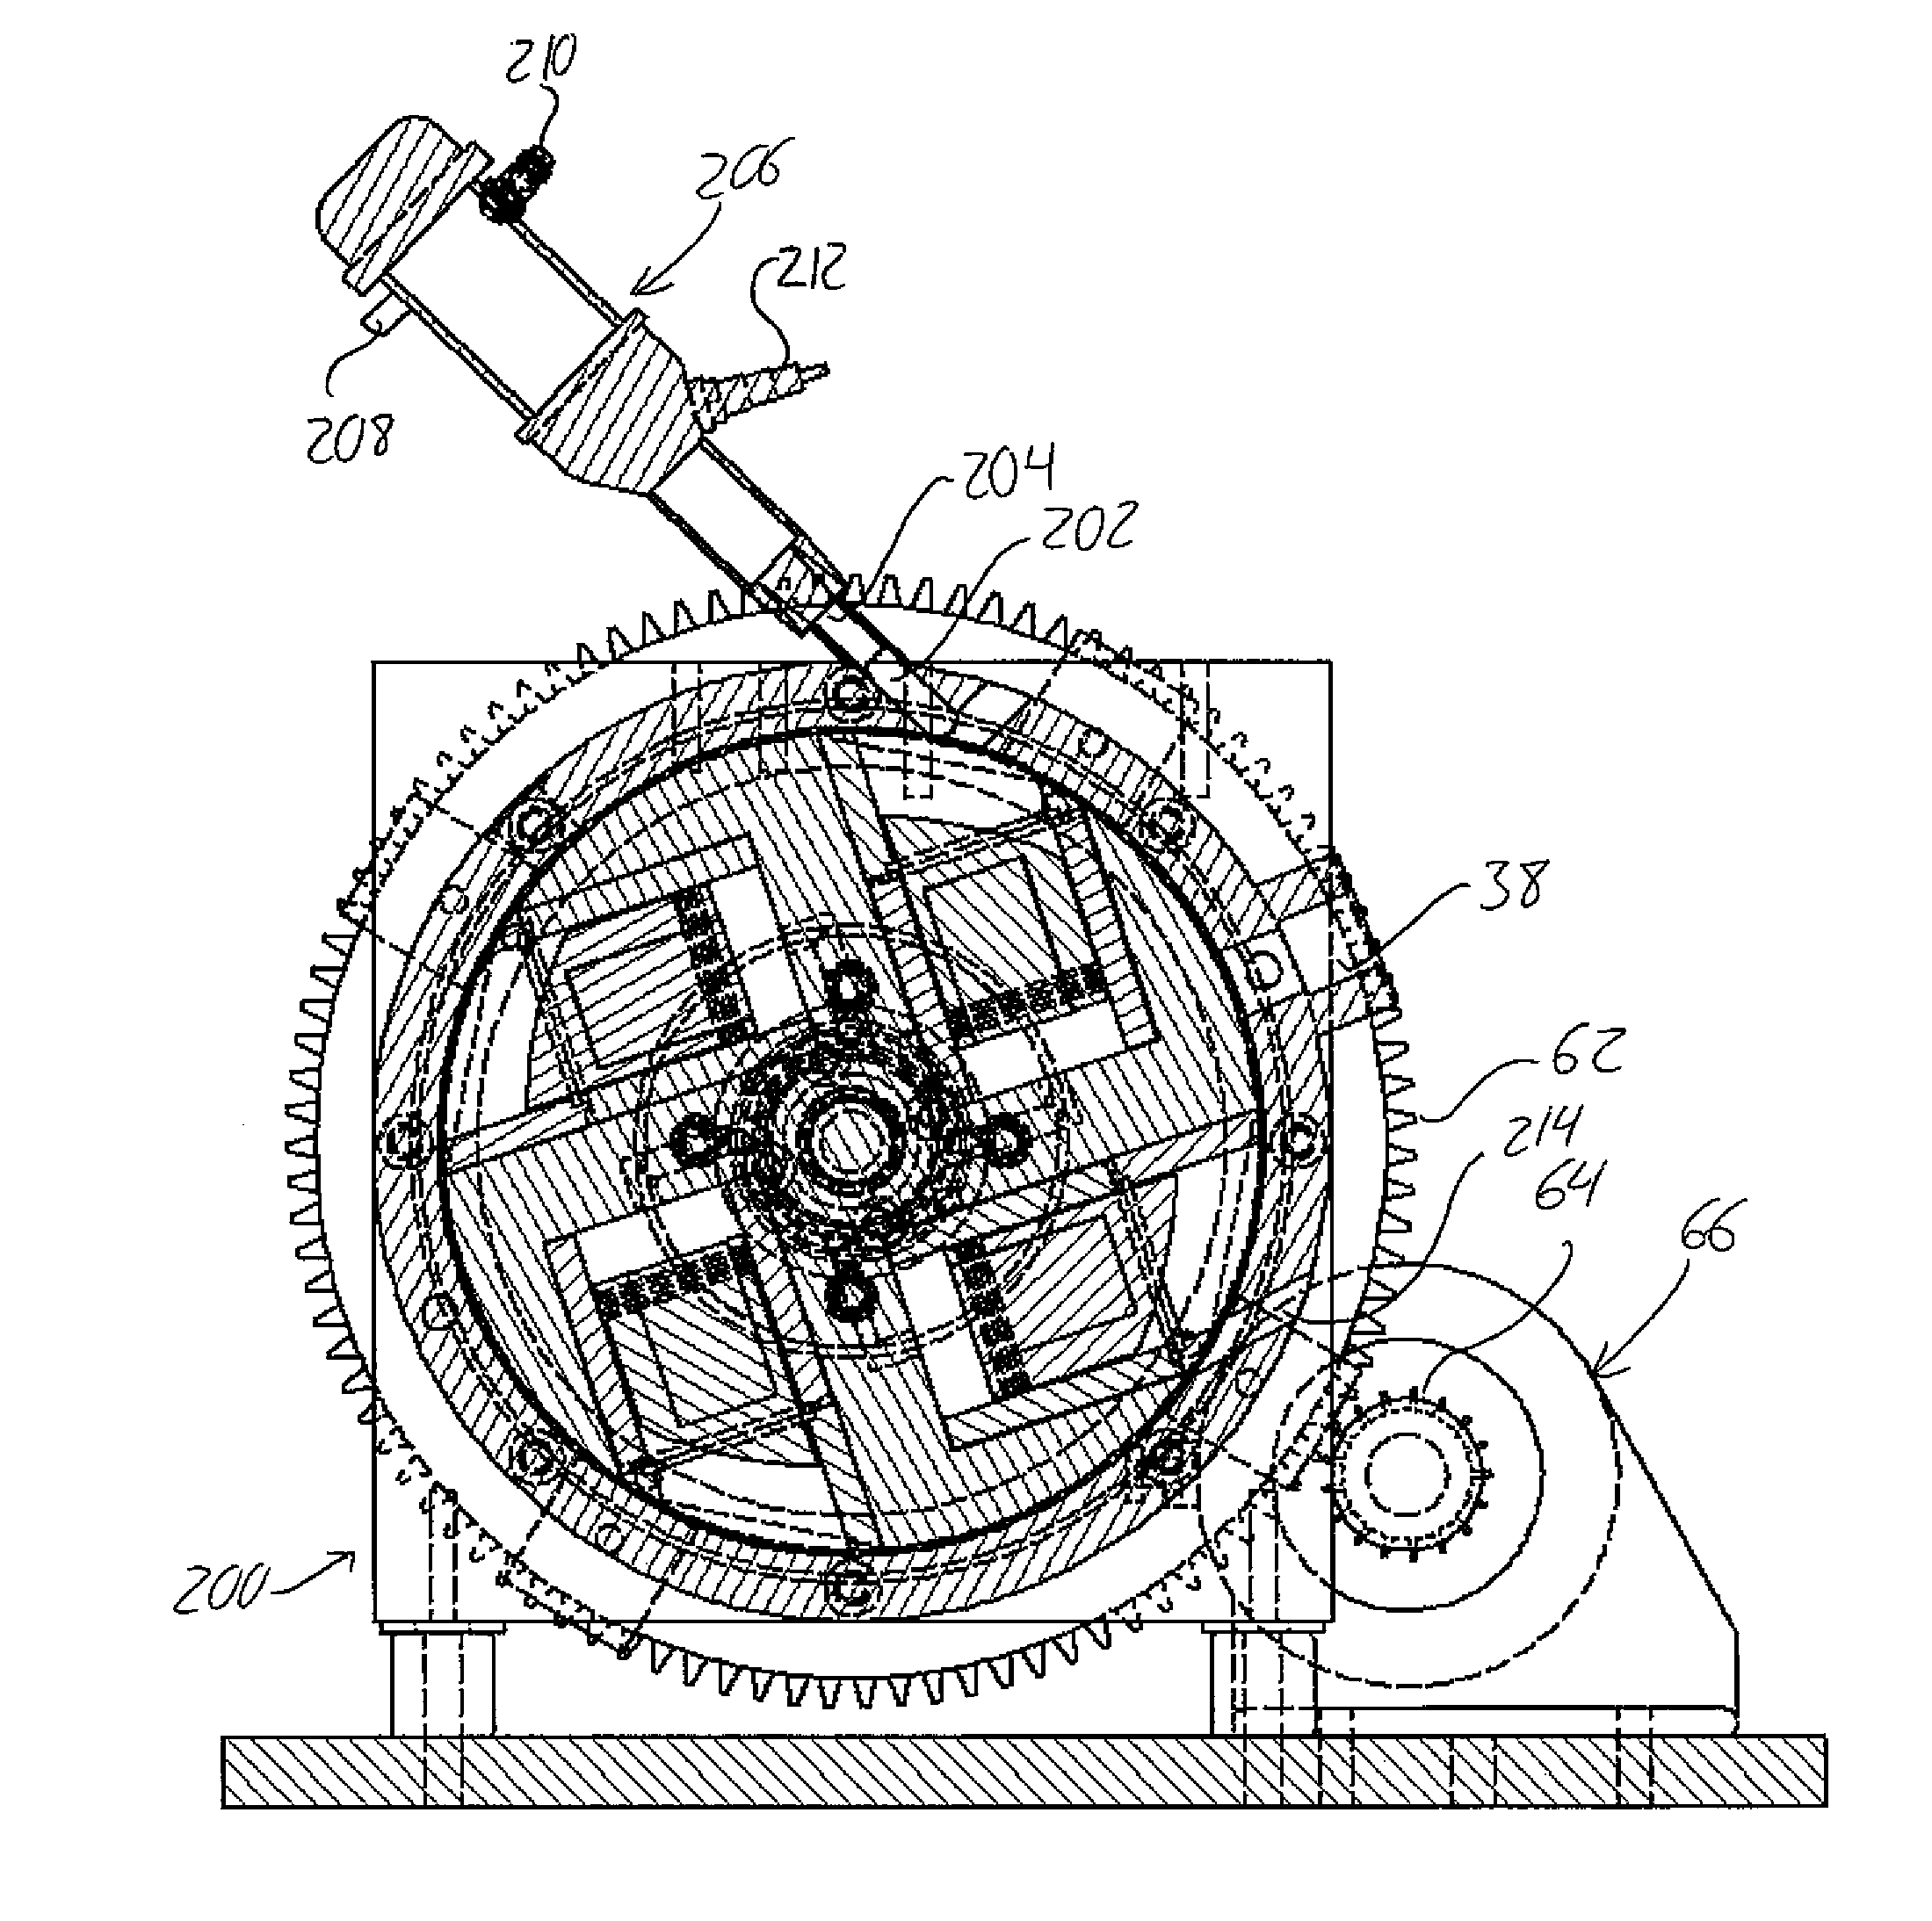 Internal combustion engine and compressor or pump with rotor and piston construction, and electrical generator pneumatically driven by same